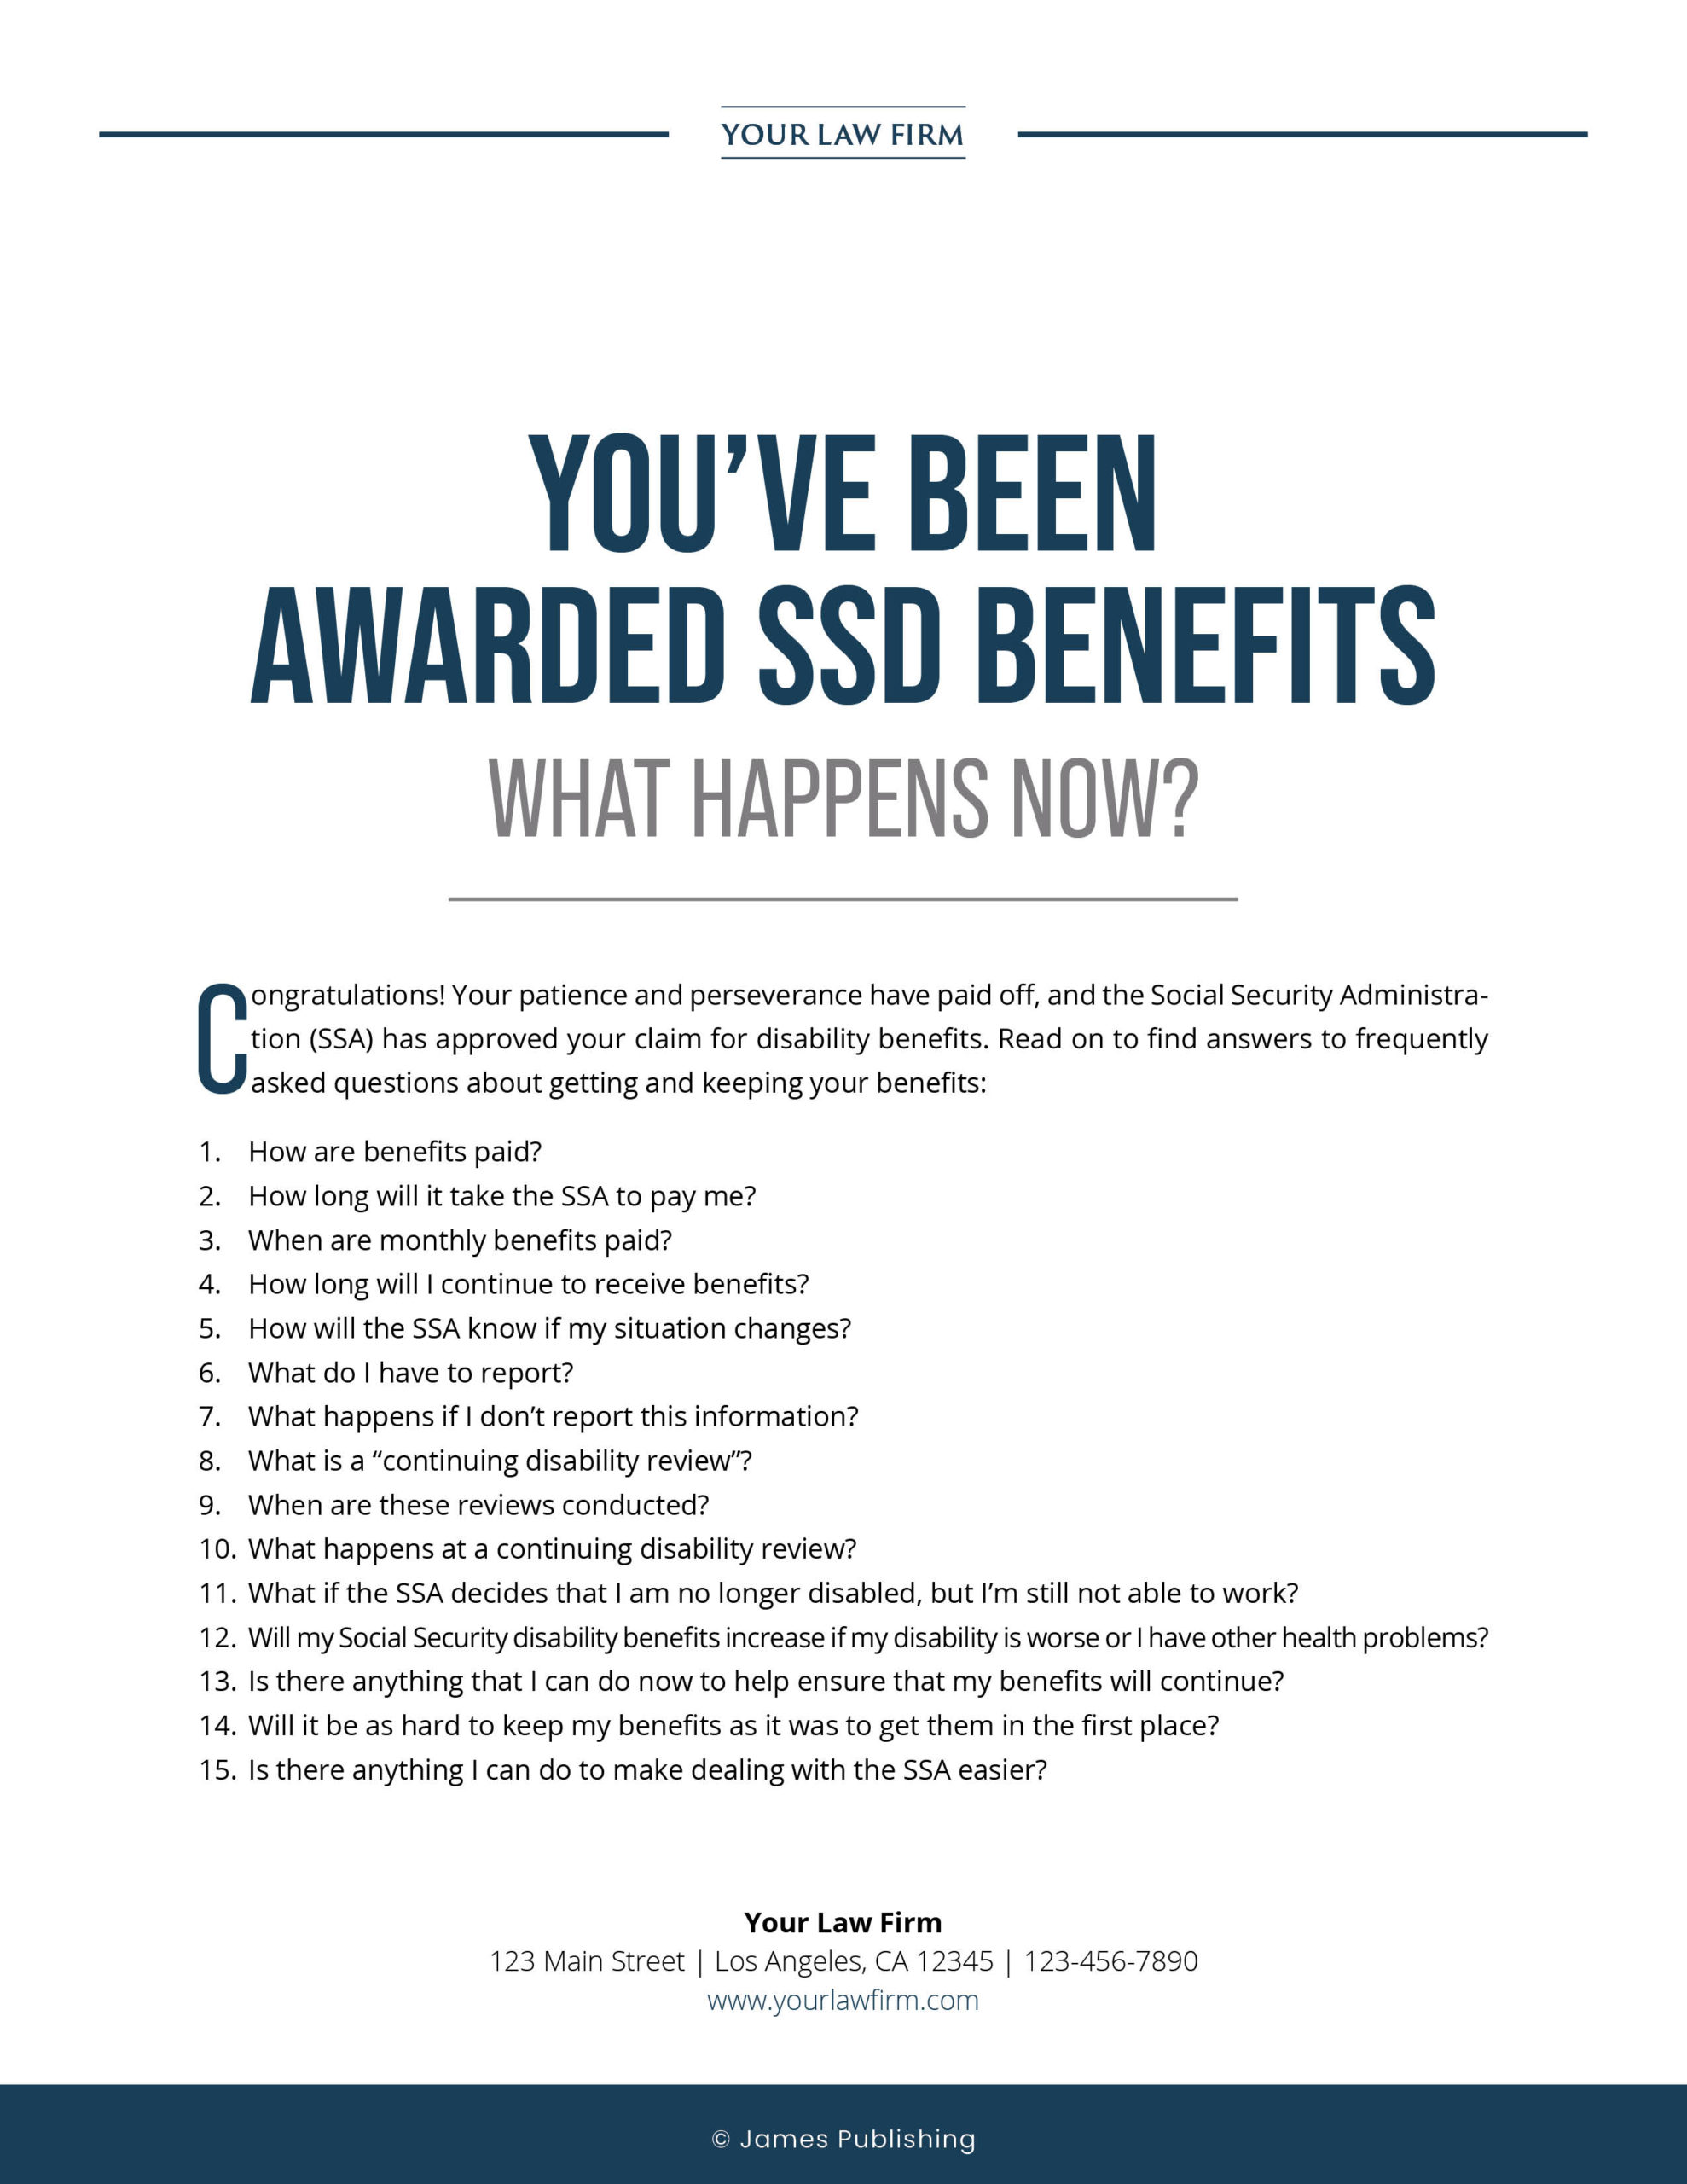 SSD-07 You've Been Awarded SSD Benefits. What Happens Now?